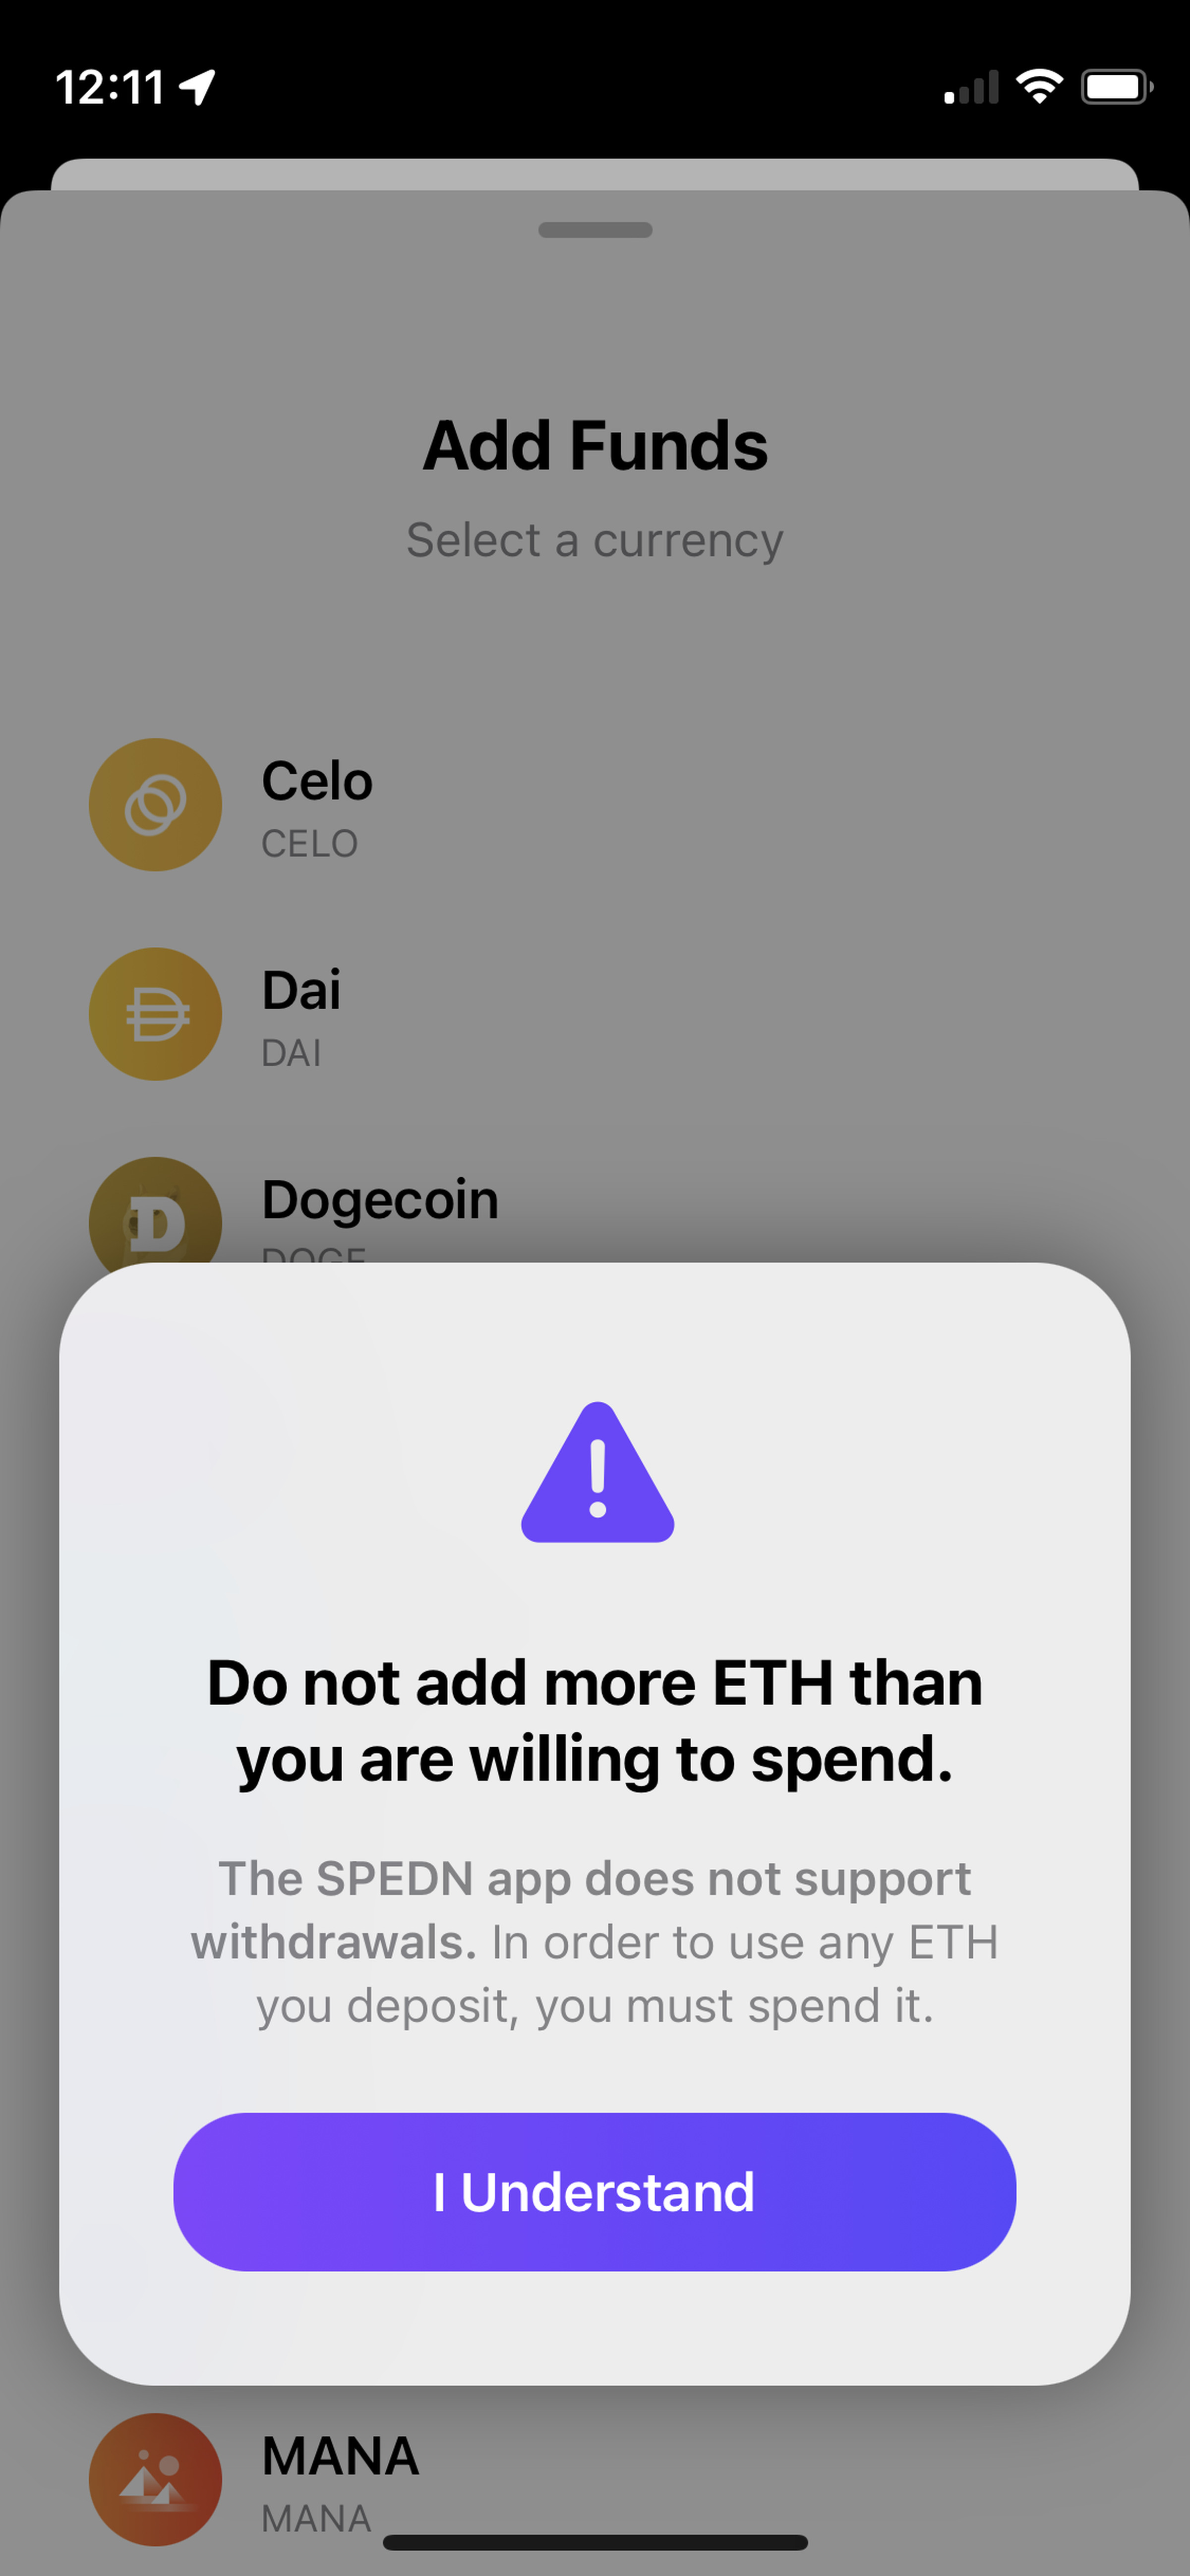 A screenshot of an app, where a pop-up warns the user “Do not add more ETH than you are willing to spend. The SPEDN app does not support withdrawals. In order to use any ETH you deposit, you must spend it.” Below that is a button that says “I understand,”